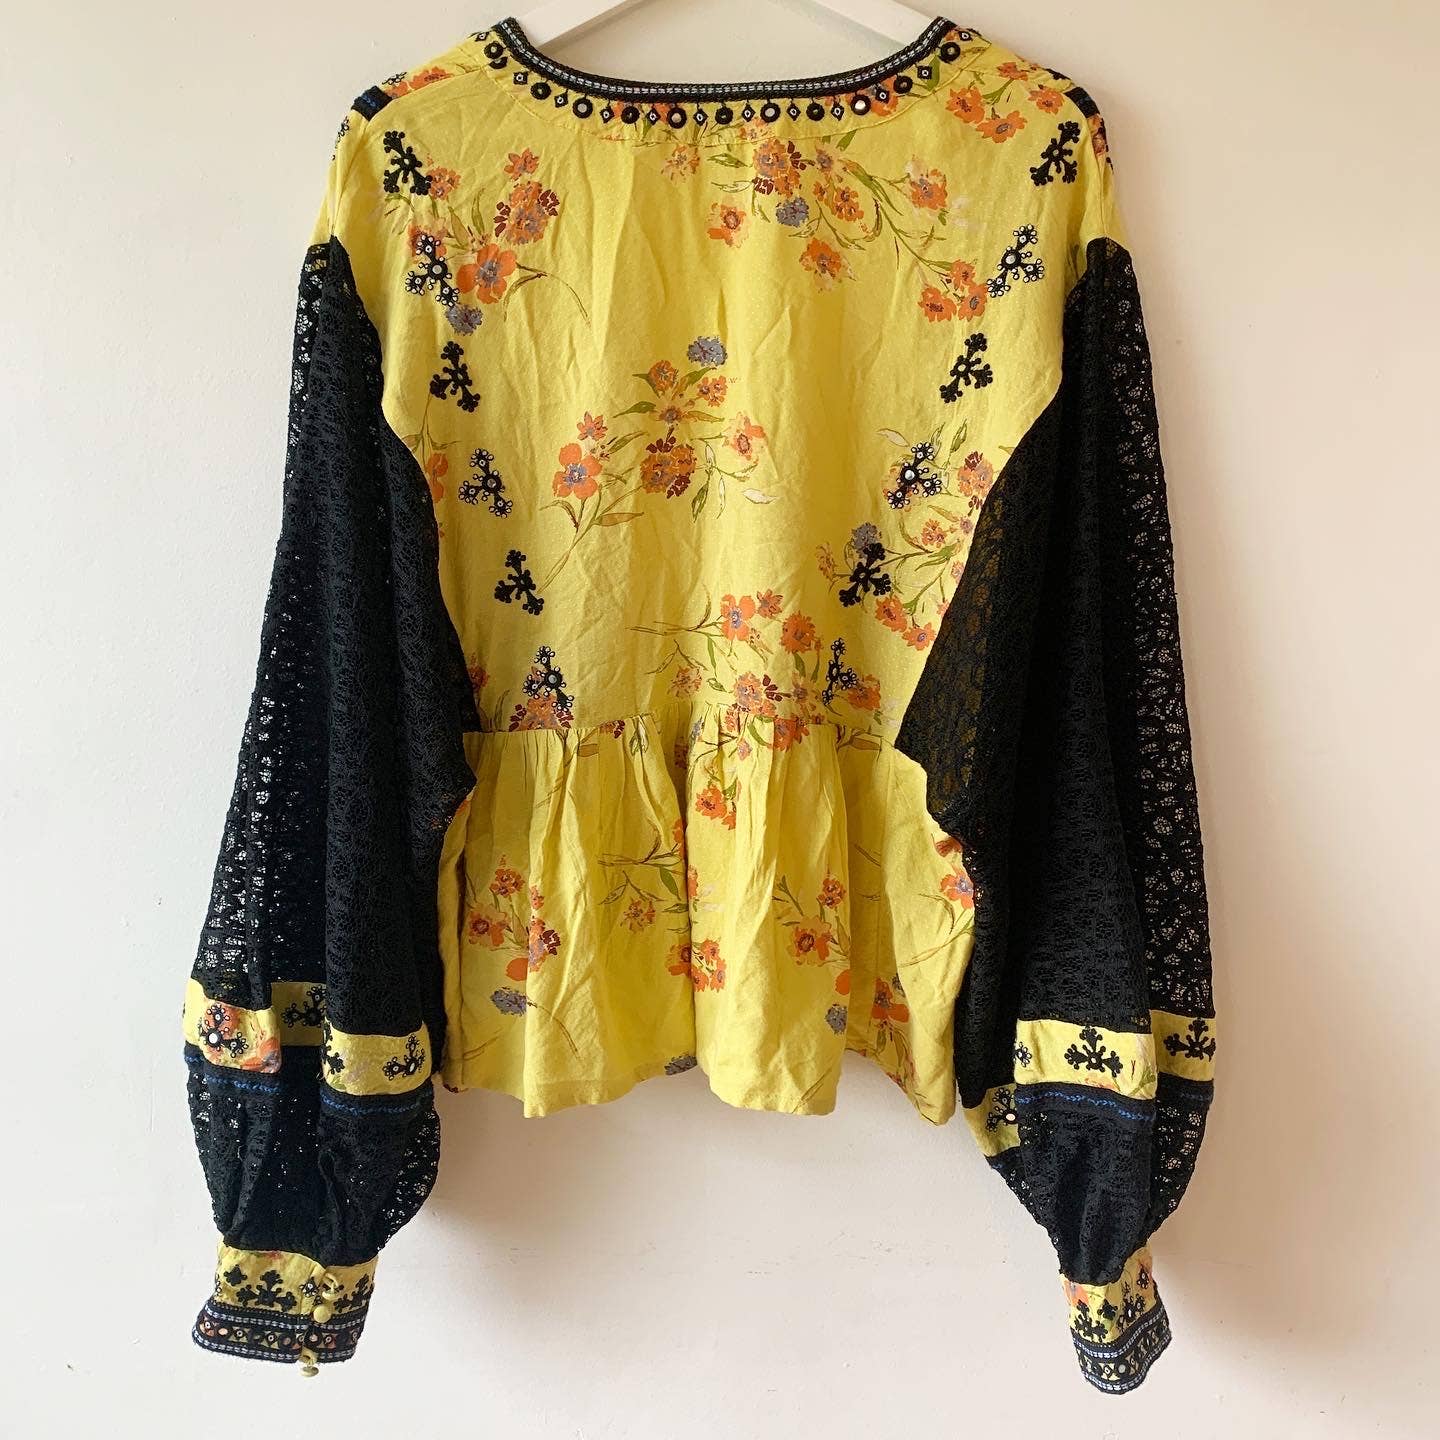 Free People Boogie All Night Bohemian Yellow Black Floral Shirt Blouse